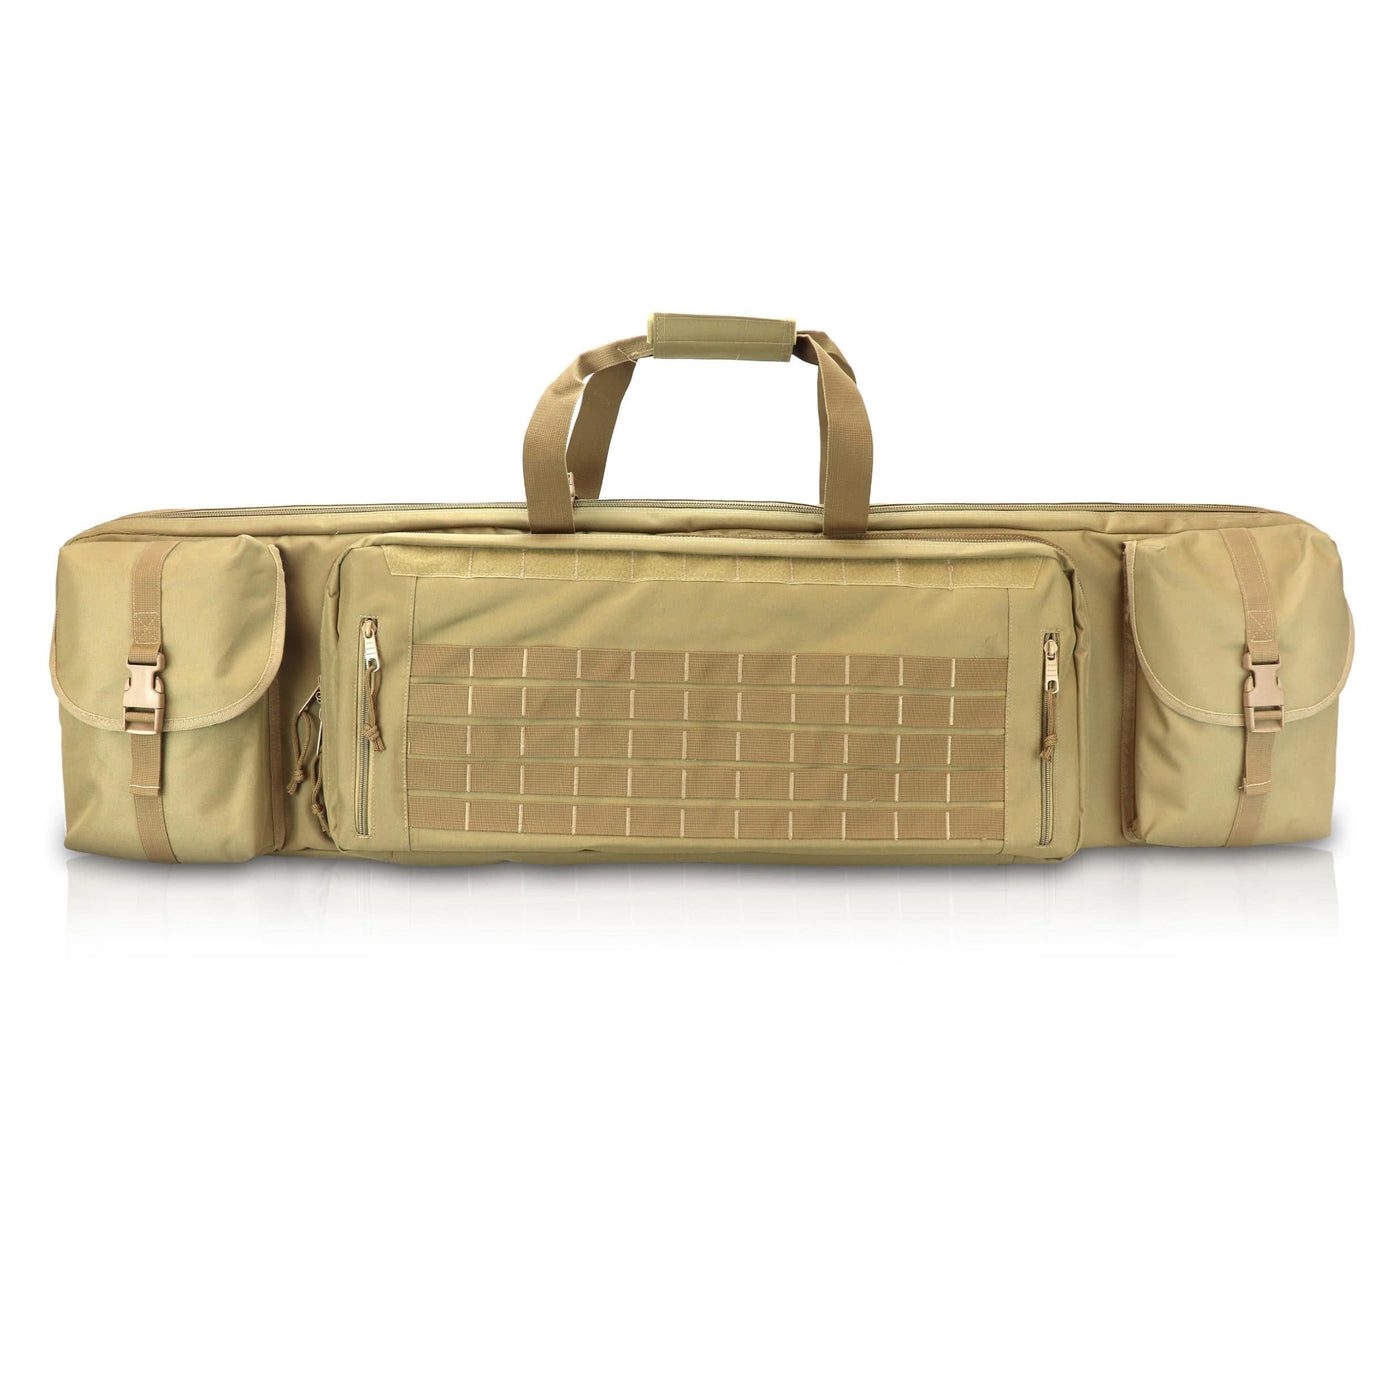 Osage River Osage River 36 in Double Rifle Case Tan Shooting